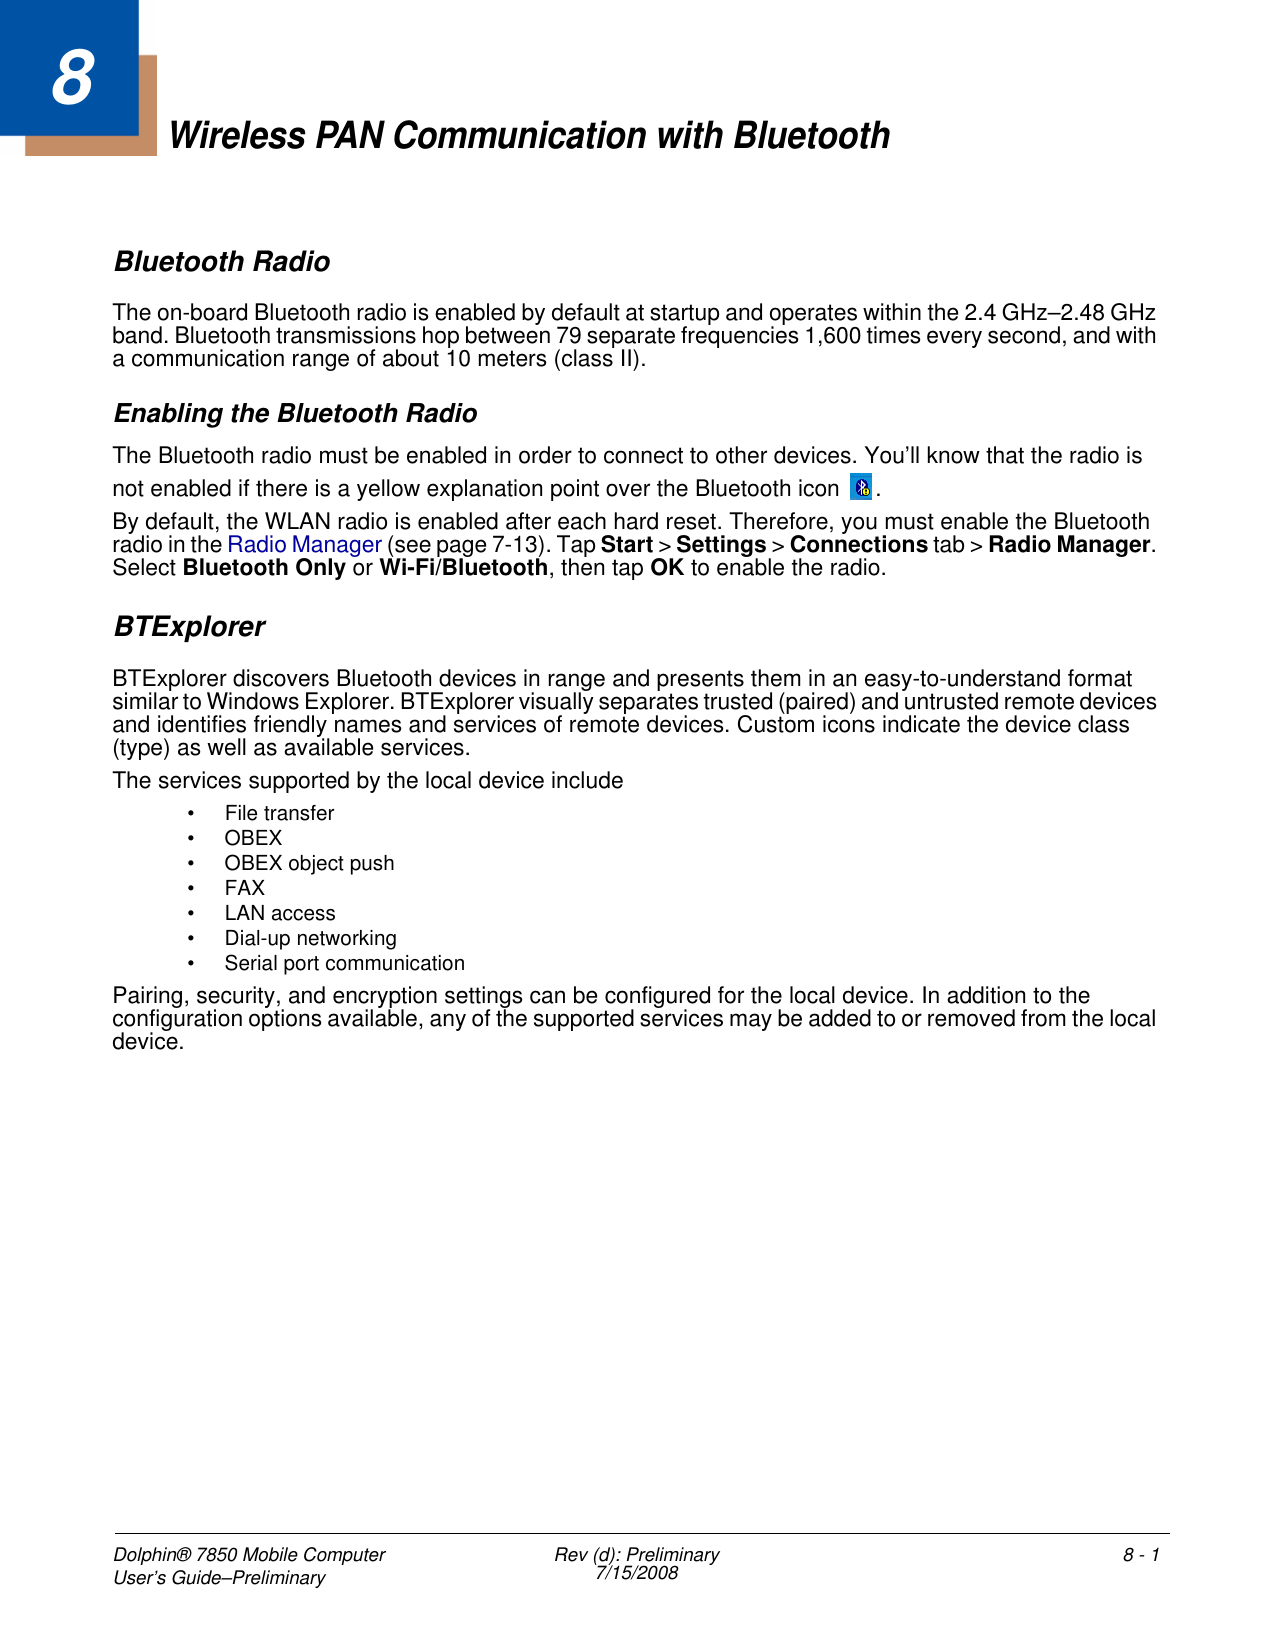 Dolphin® 7850 Mobile Computer User’s Guide–Preliminary  Rev (d): Preliminary7/15/2008 8 - 18Wireless PAN Communication with BluetoothBluetooth RadioThe on-board Bluetooth radio is enabled by default at startup and operates within the 2.4 GHz–2.48 GHz band. Bluetooth transmissions hop between 79 separate frequencies 1,600 times every second, and with a communication range of about 10 meters (class II). Enabling the Bluetooth RadioThe Bluetooth radio must be enabled in order to connect to other devices. You’ll know that the radio is not enabled if there is a yellow explanation point over the Bluetooth icon  .By default, the WLAN radio is enabled after each hard reset. Therefore, you must enable the Bluetooth radio in the Radio Manager (see page 7-13). Tap Start &gt; Settings &gt; Connections tab &gt; Radio Manager. Select Bluetooth Only or Wi-Fi/Bluetooth, then tap OK to enable the radio.BTExplorerBTExplorer discovers Bluetooth devices in range and presents them in an easy-to-understand format similar to Windows Explorer. BTExplorer visually separates trusted (paired) and untrusted remote devices and identifies friendly names and services of remote devices. Custom icons indicate the device class (type) as well as available services.The services supported by the local device include • File transfer• OBEX• OBEX object push•FAX• LAN access• Dial-up networking• Serial port communicationPairing, security, and encryption settings can be configured for the local device. In addition to the configuration options available, any of the supported services may be added to or removed from the local device.